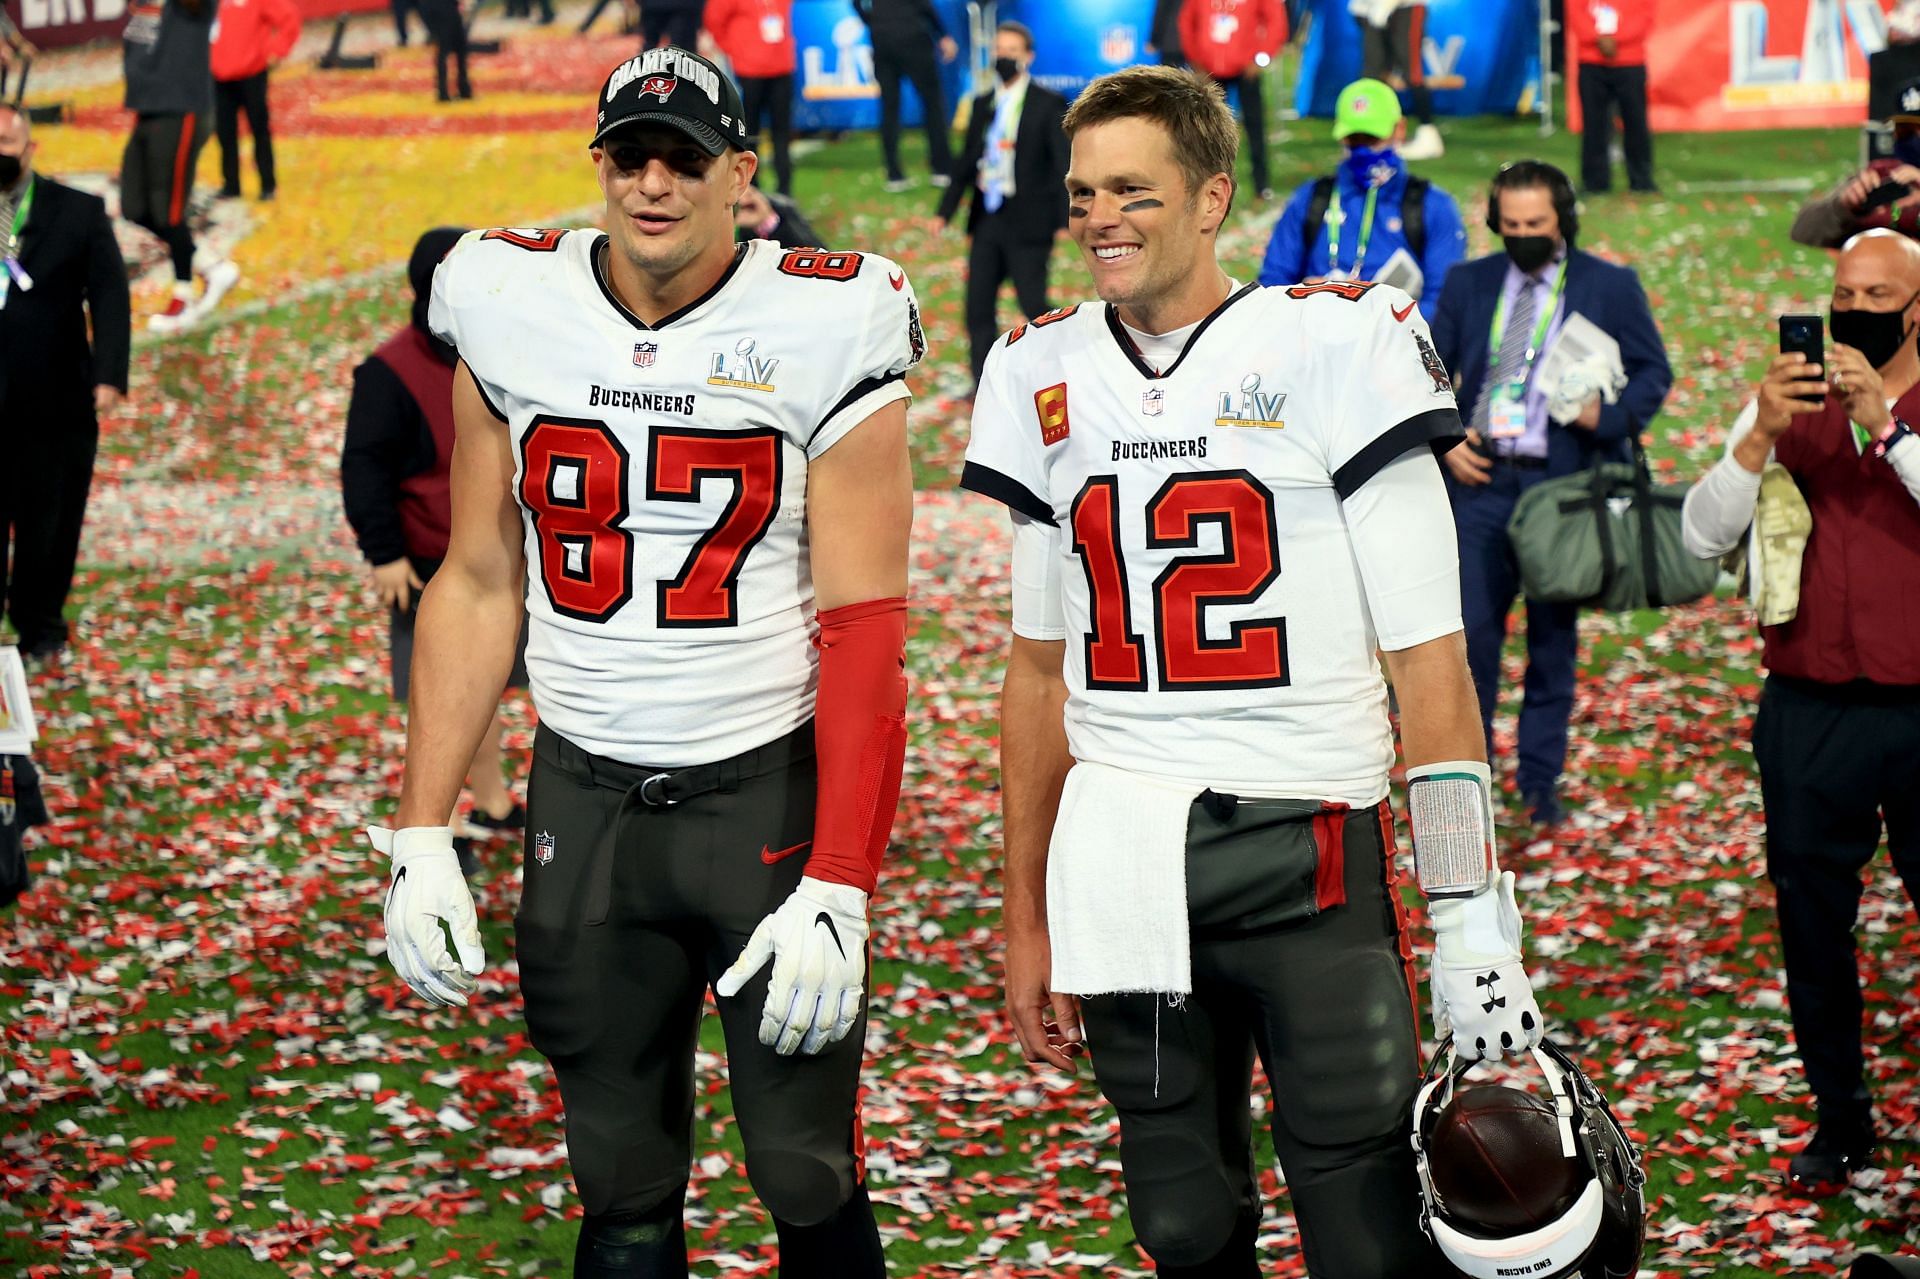 The duo after winning Super Bowl LV